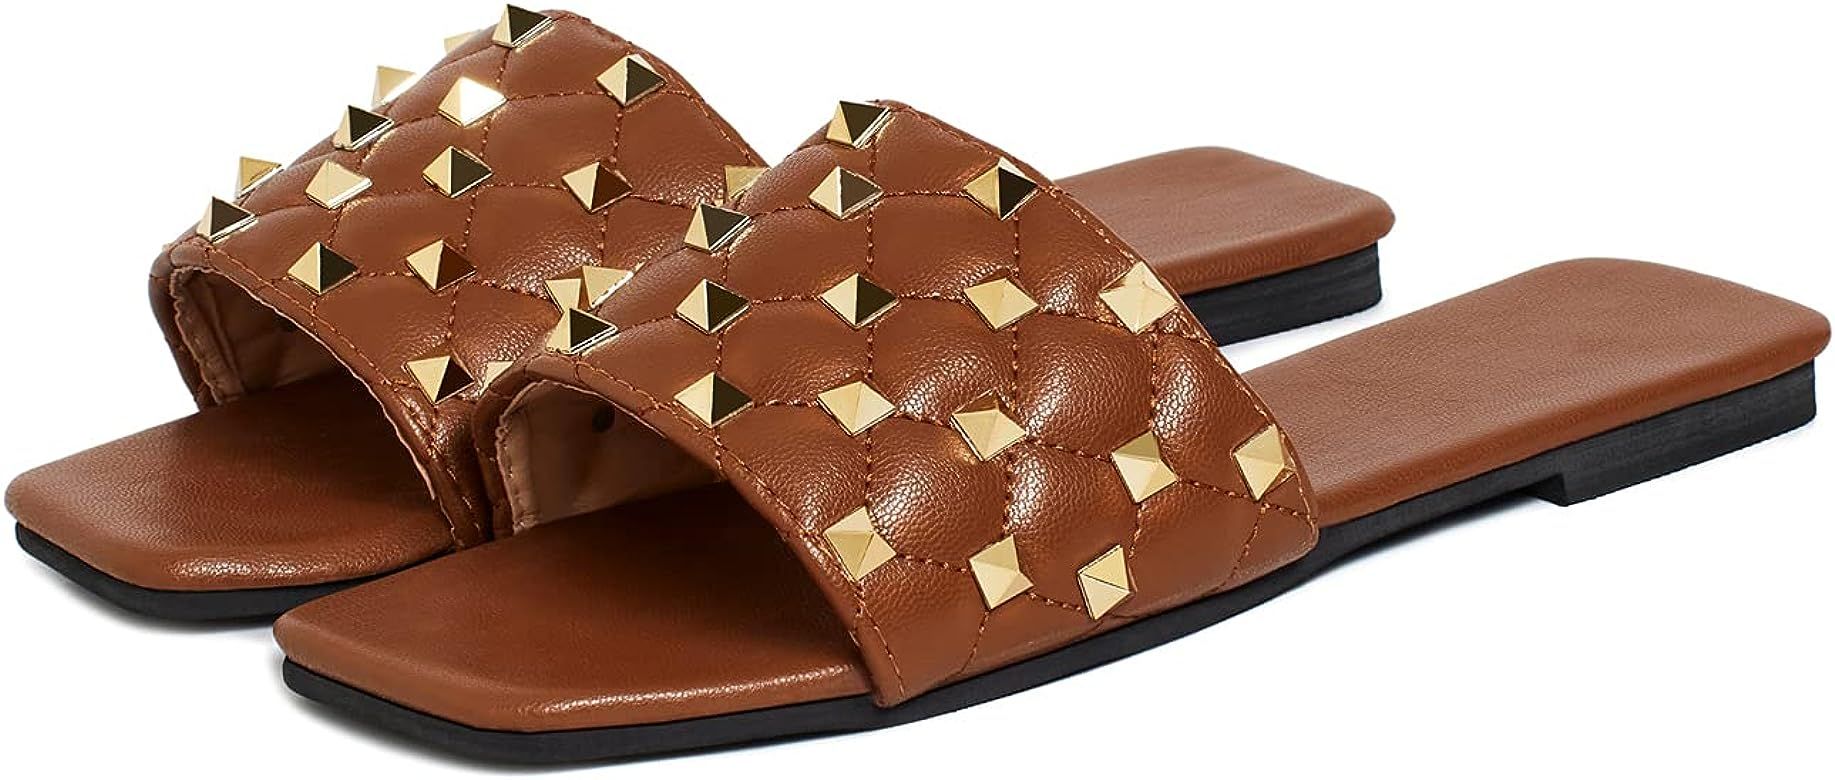 Women's Studded Sandals Flat Square Open Toe Pleather Strap Slides Slip On Casual Shoes | Amazon (US)